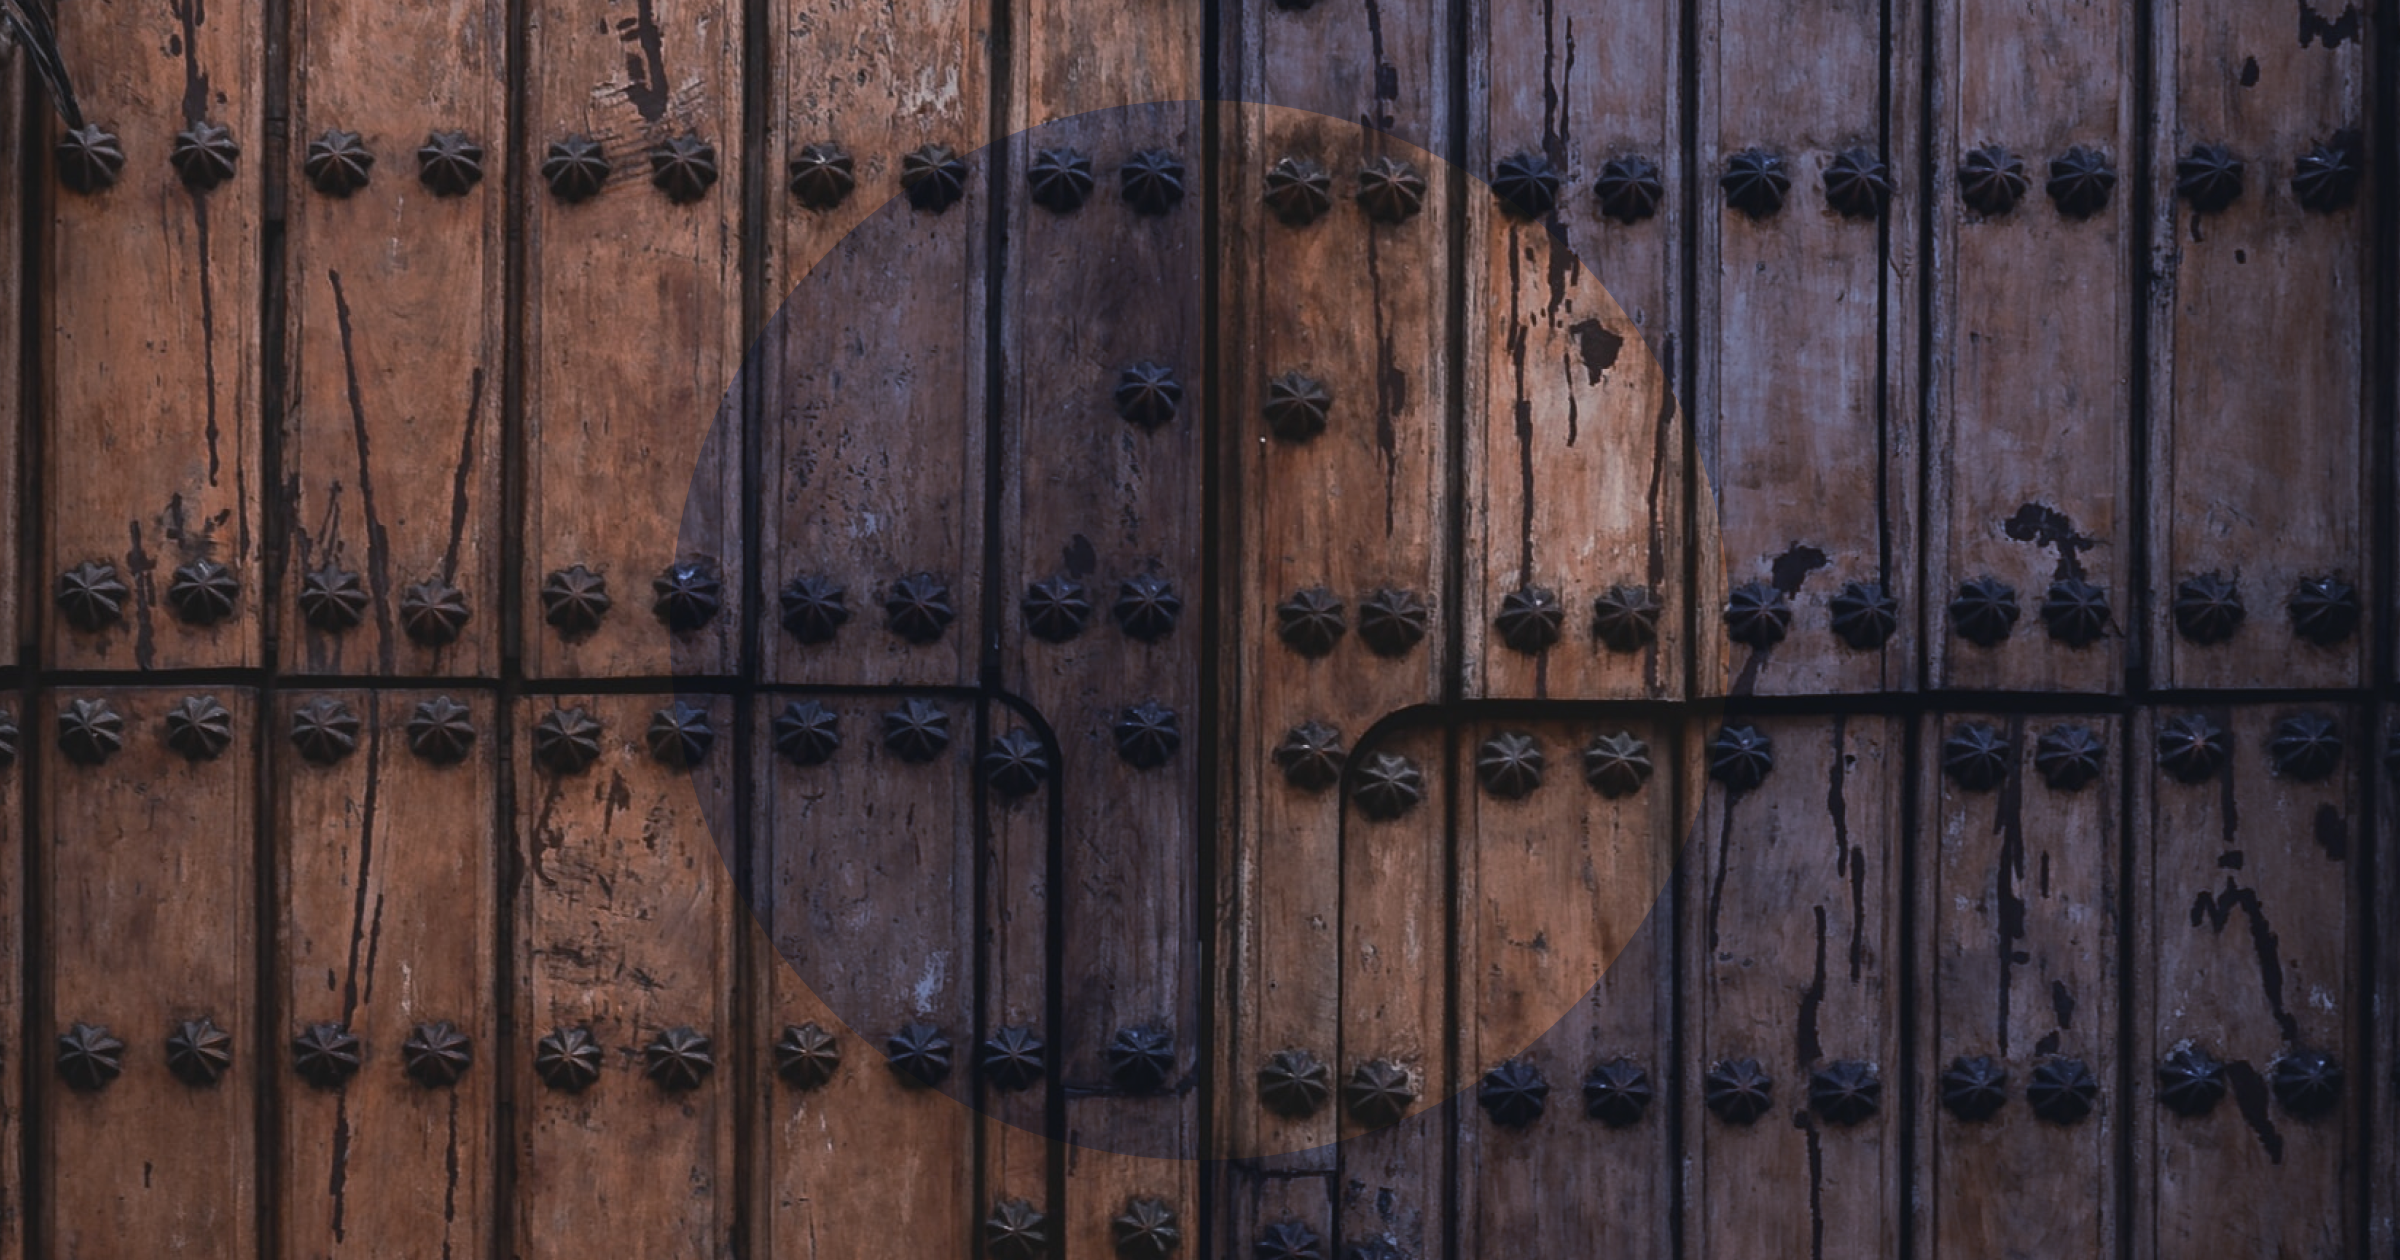 An image of a door that represents Wittenberg Chapel where Martin Luther nailed the 95 Theses which sparked the beginning of the Reformation